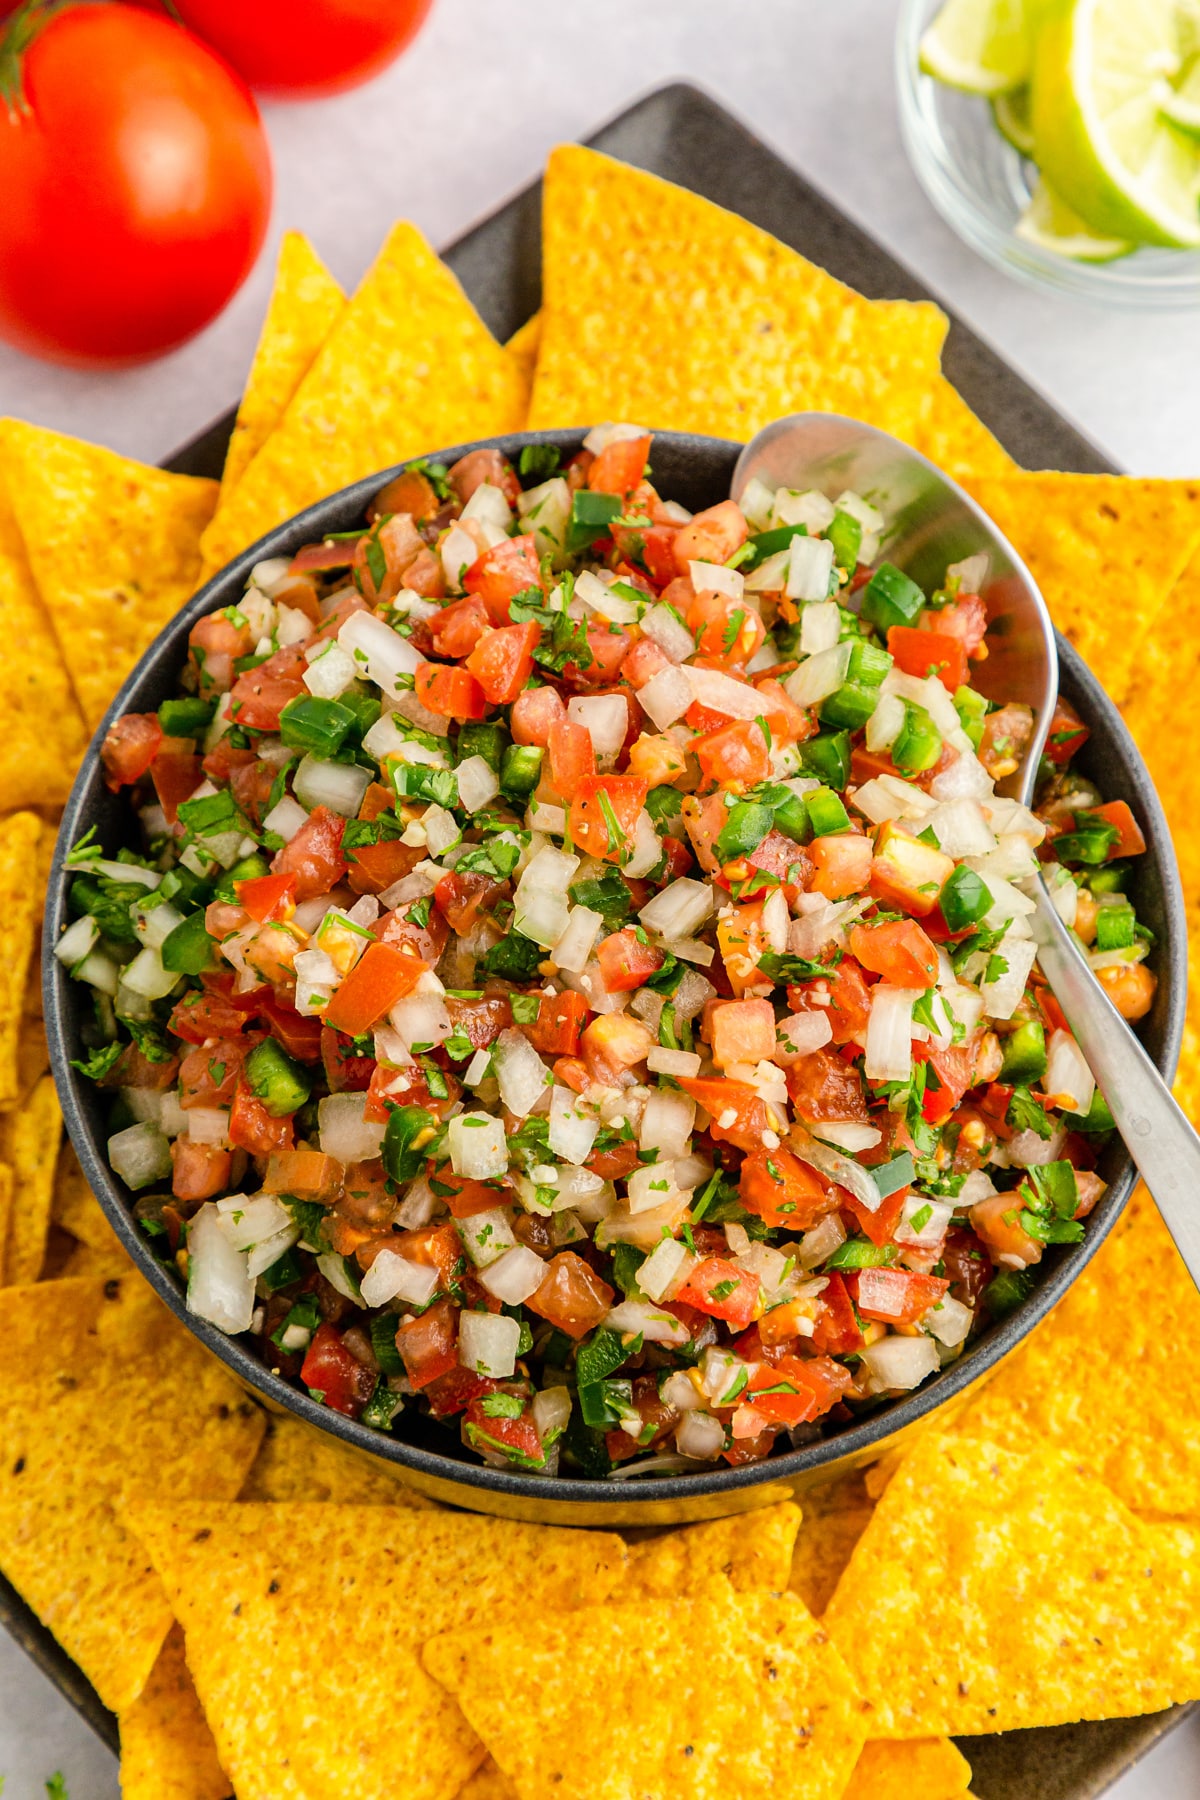 Add pico de gallo to serving bowl with spoon and serve with chips or as a topping